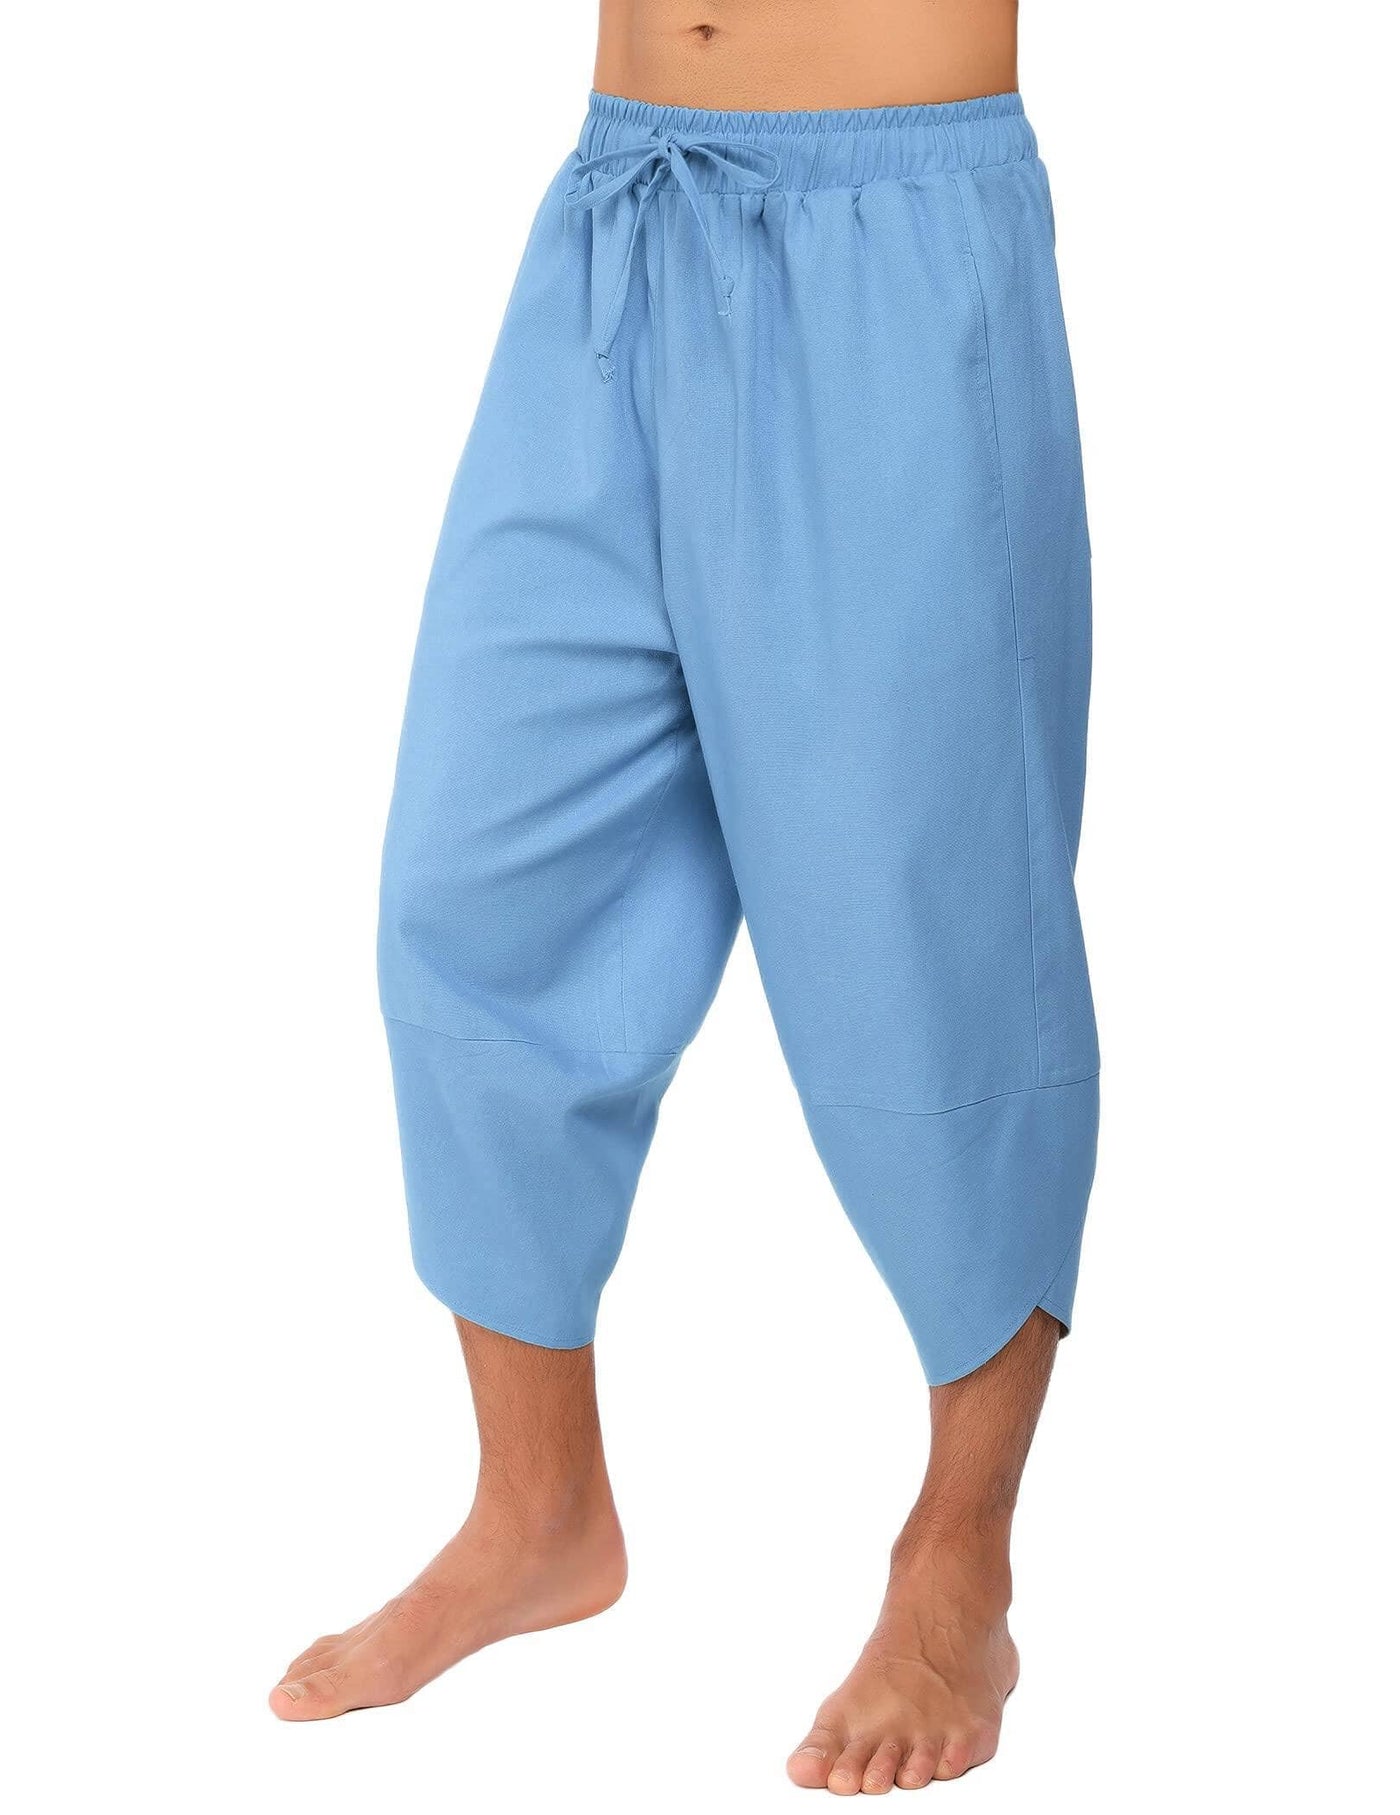 Coofandy Linen Style 3/4 Shorts Yoga Trousers (US Only) Pants coofandy Light Blue S 